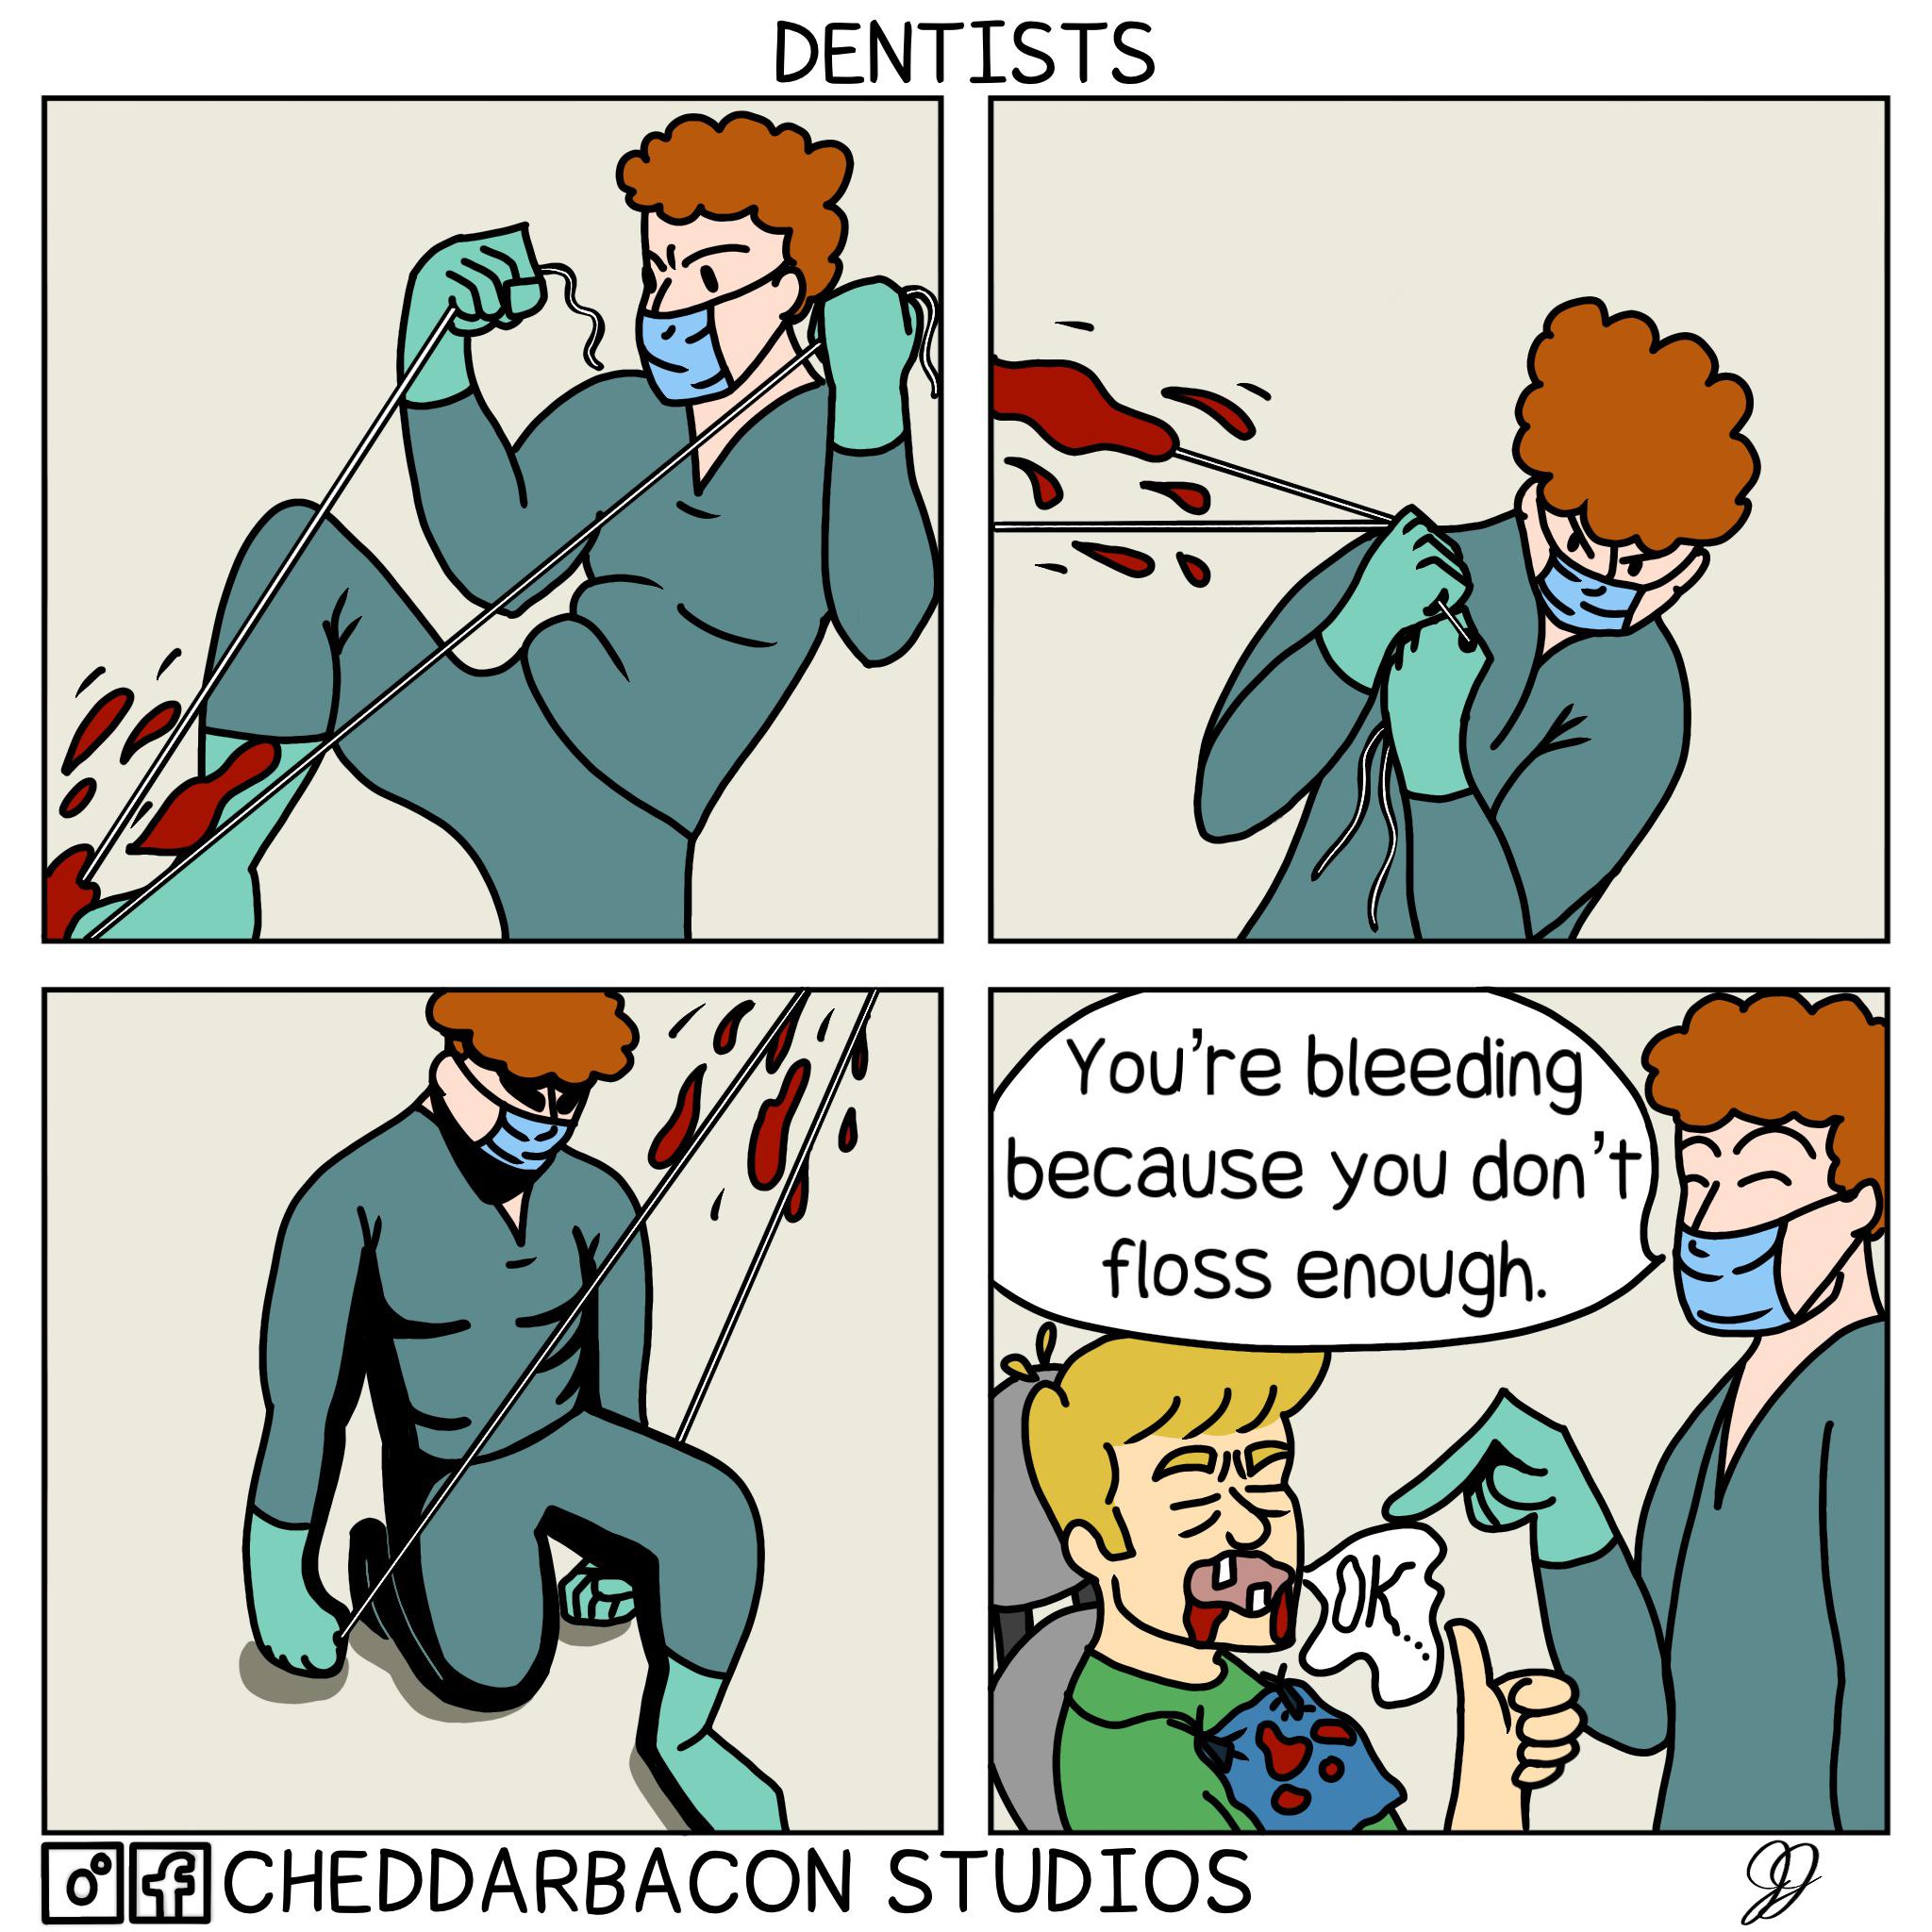 Why you always bleed'n? - Dentists, usually.